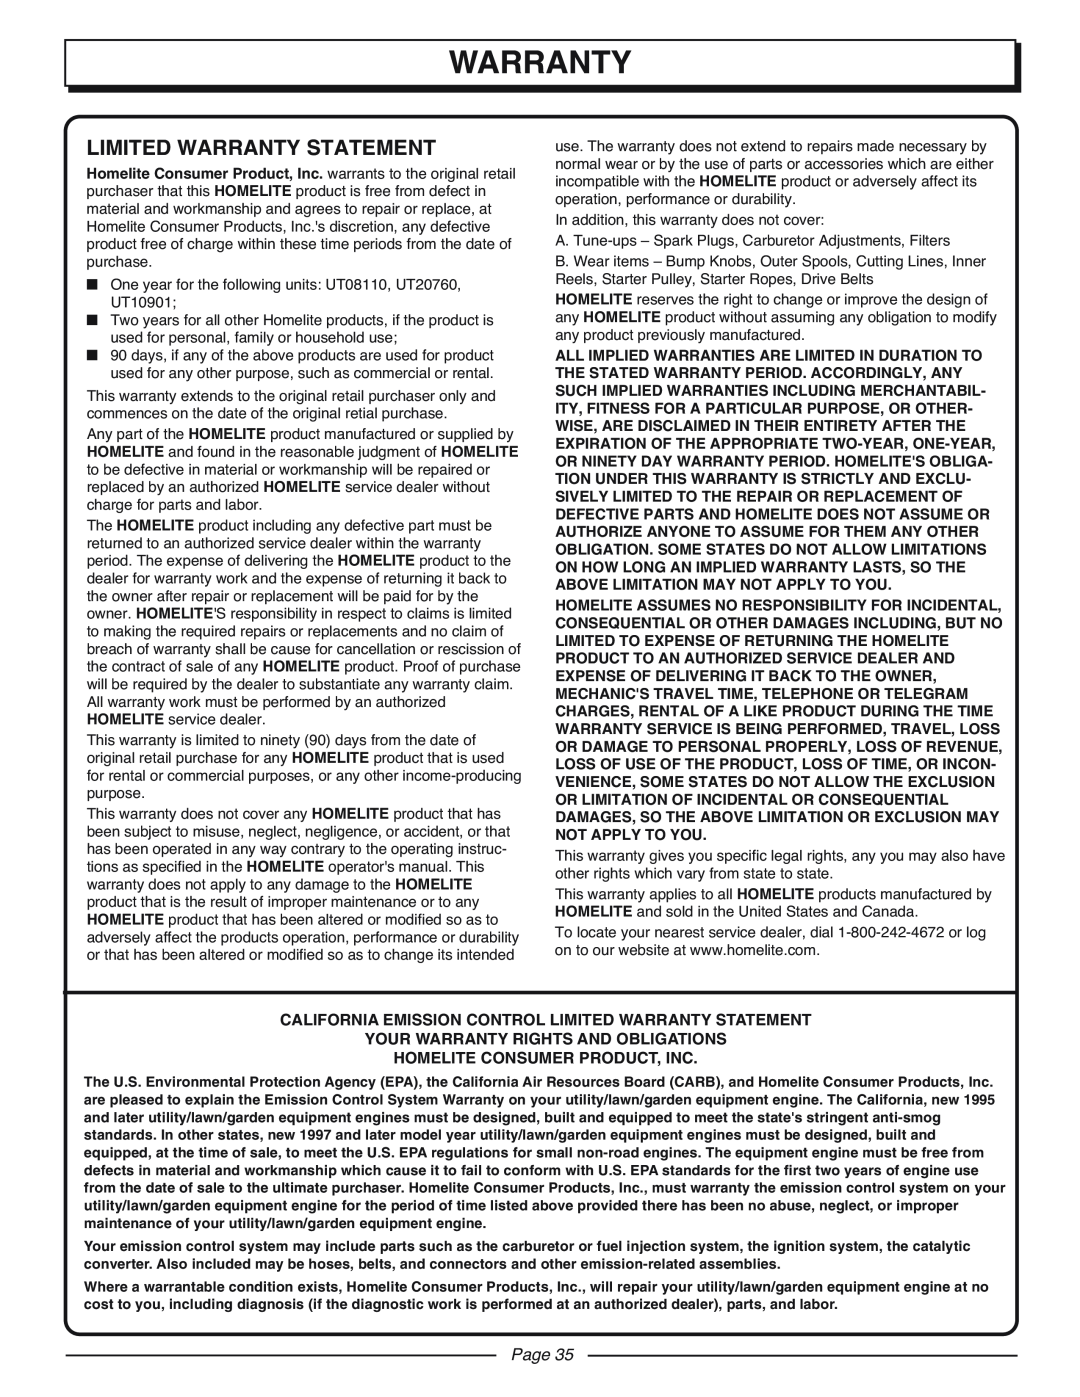 Homelite UT10927A manual Page, California Emission Control Limited Warranty Statement 